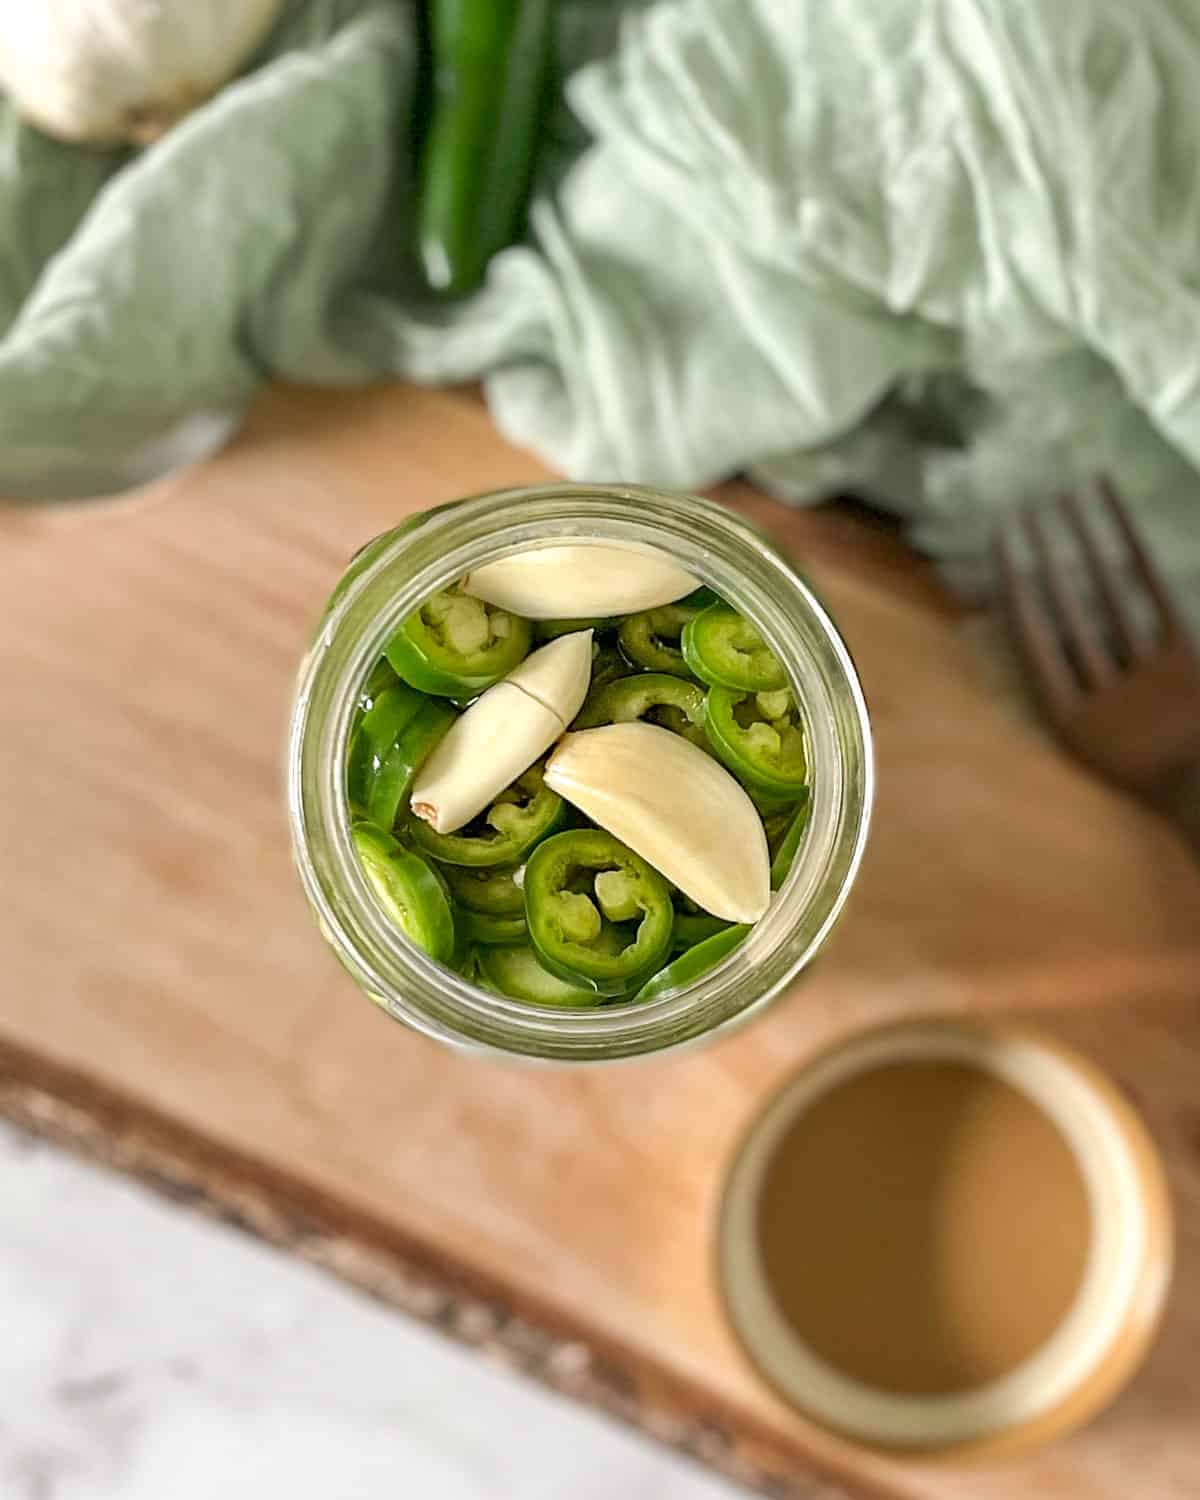 Pickled serrano peppers are shown in a glass jar surrounded by garlic, serrano peppers, and a fork.